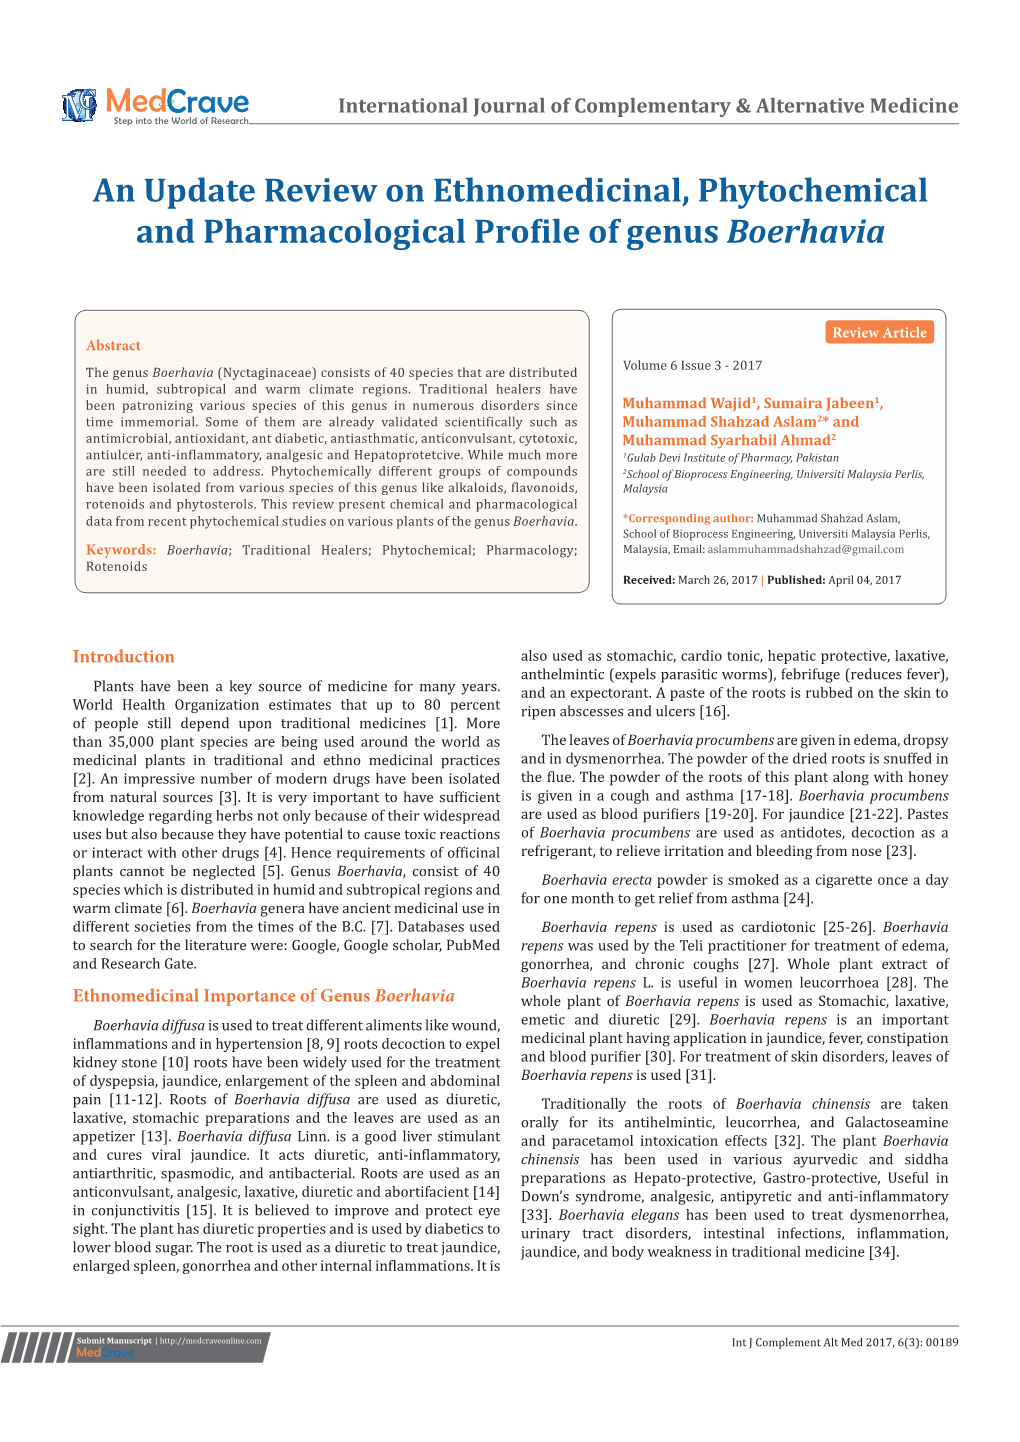 An Update Review on Ethnomedicinal, Phytochemical and Pharmacological Profile of Genus Boerhavia